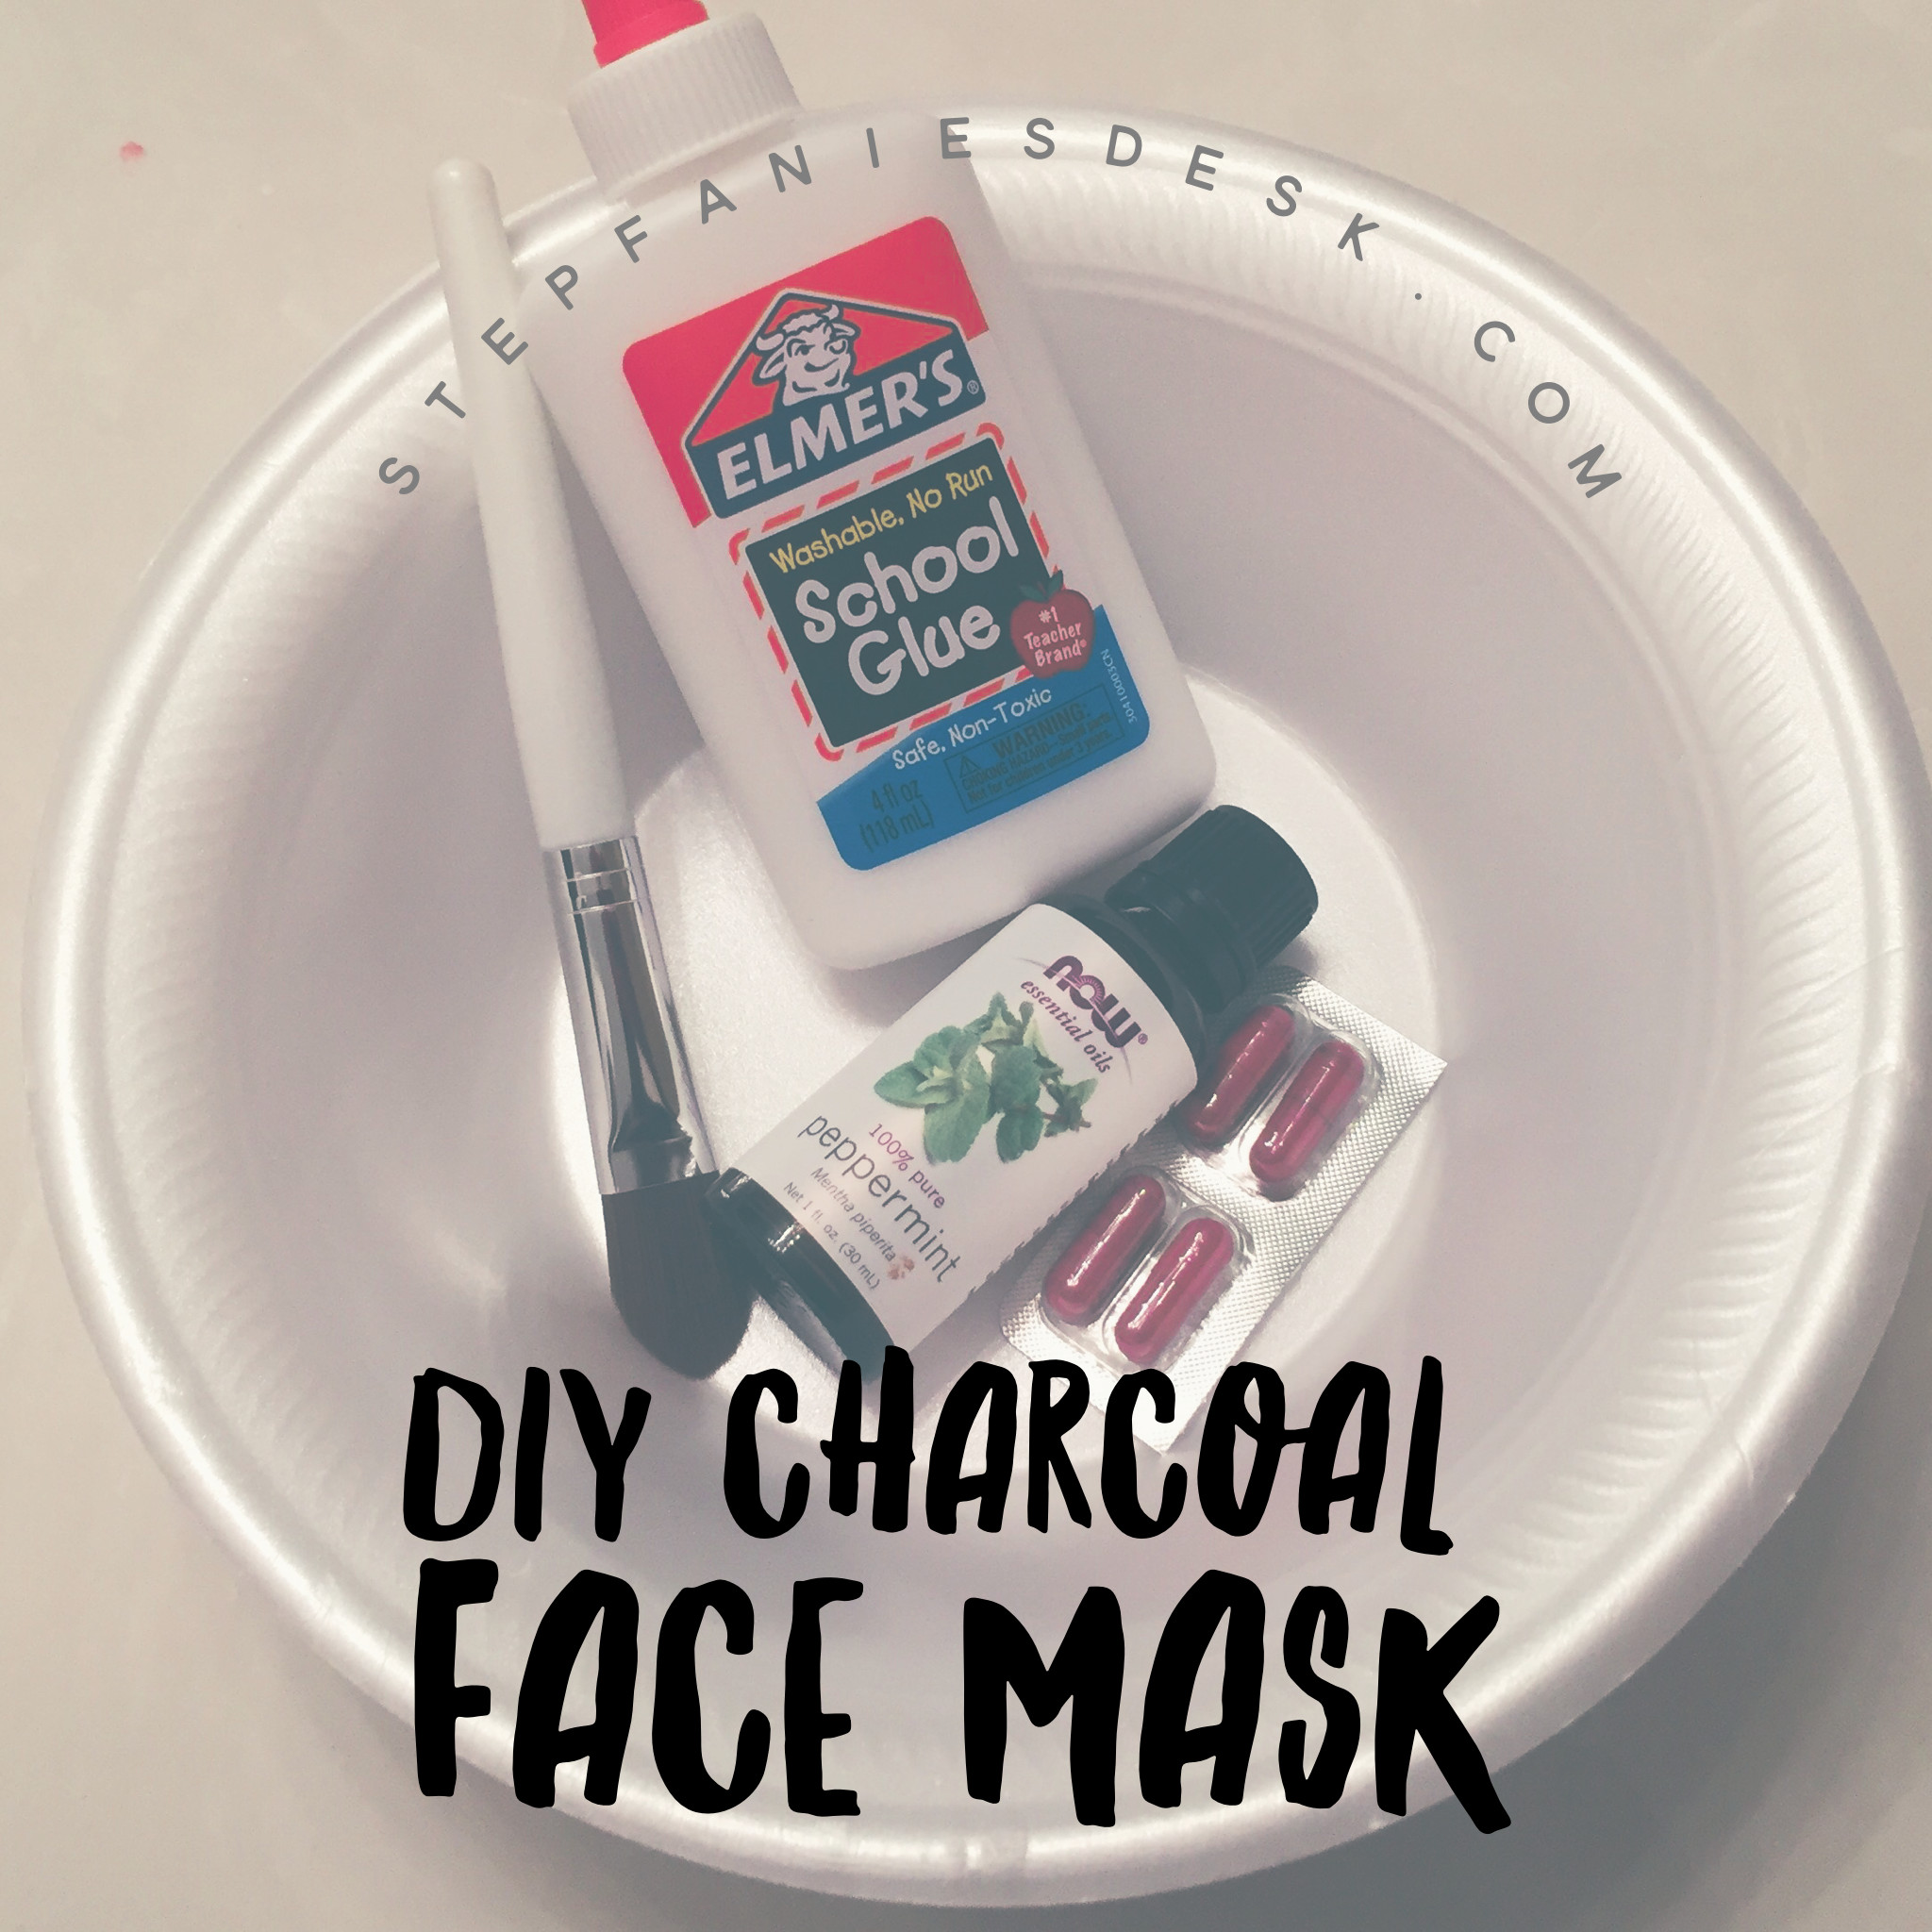 DIY Charcoal Mask With Glue
 DIY Charcoal Face Mask